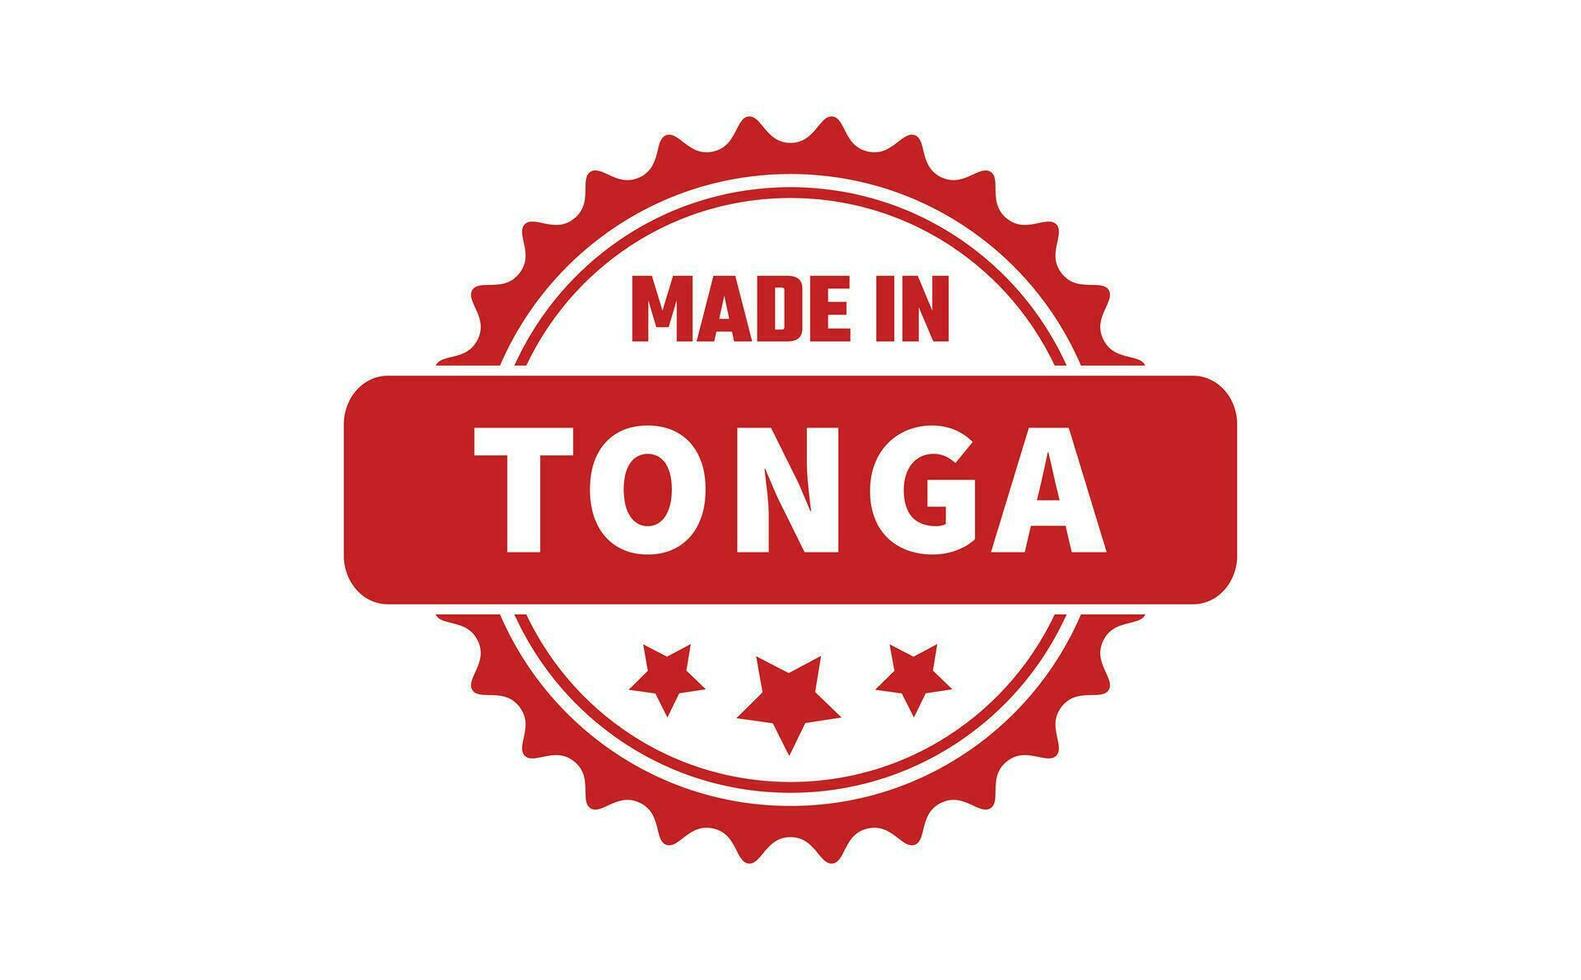 Made In Tonga Rubber Stamp vector